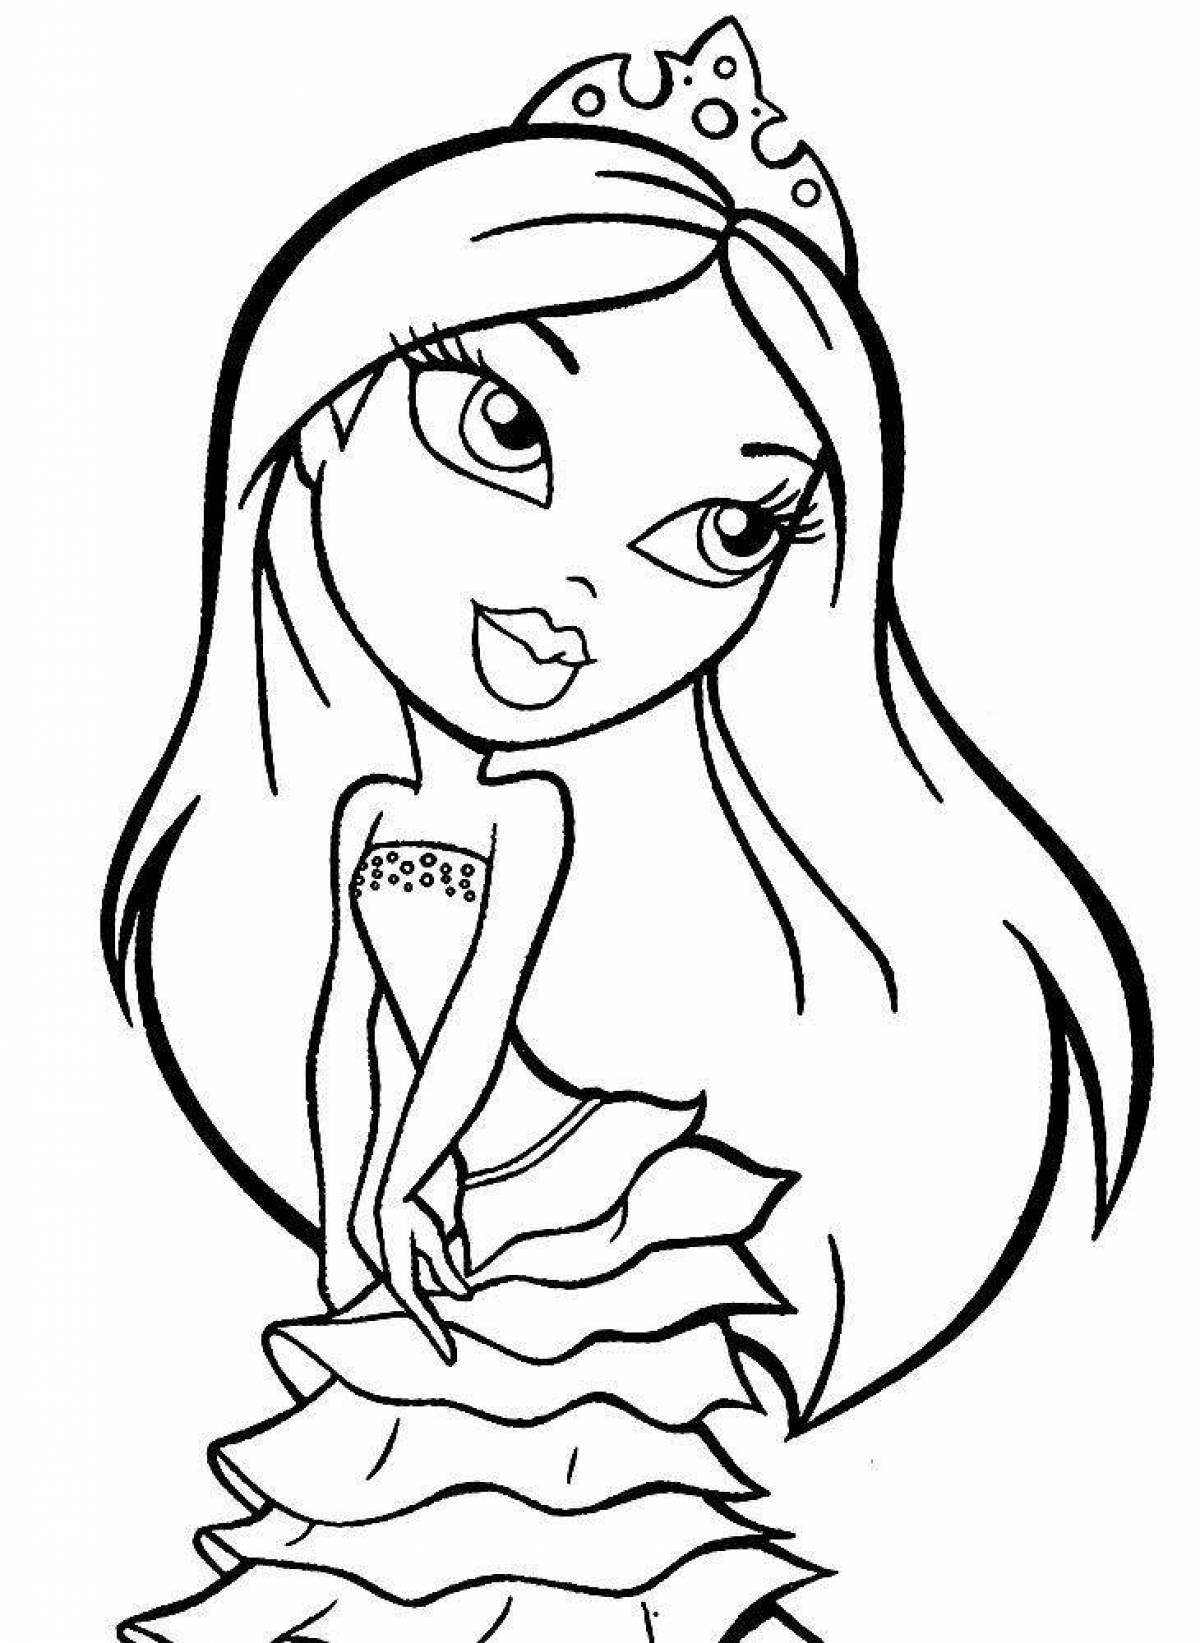 Colorful coloring page for inspiration to create a coloring page